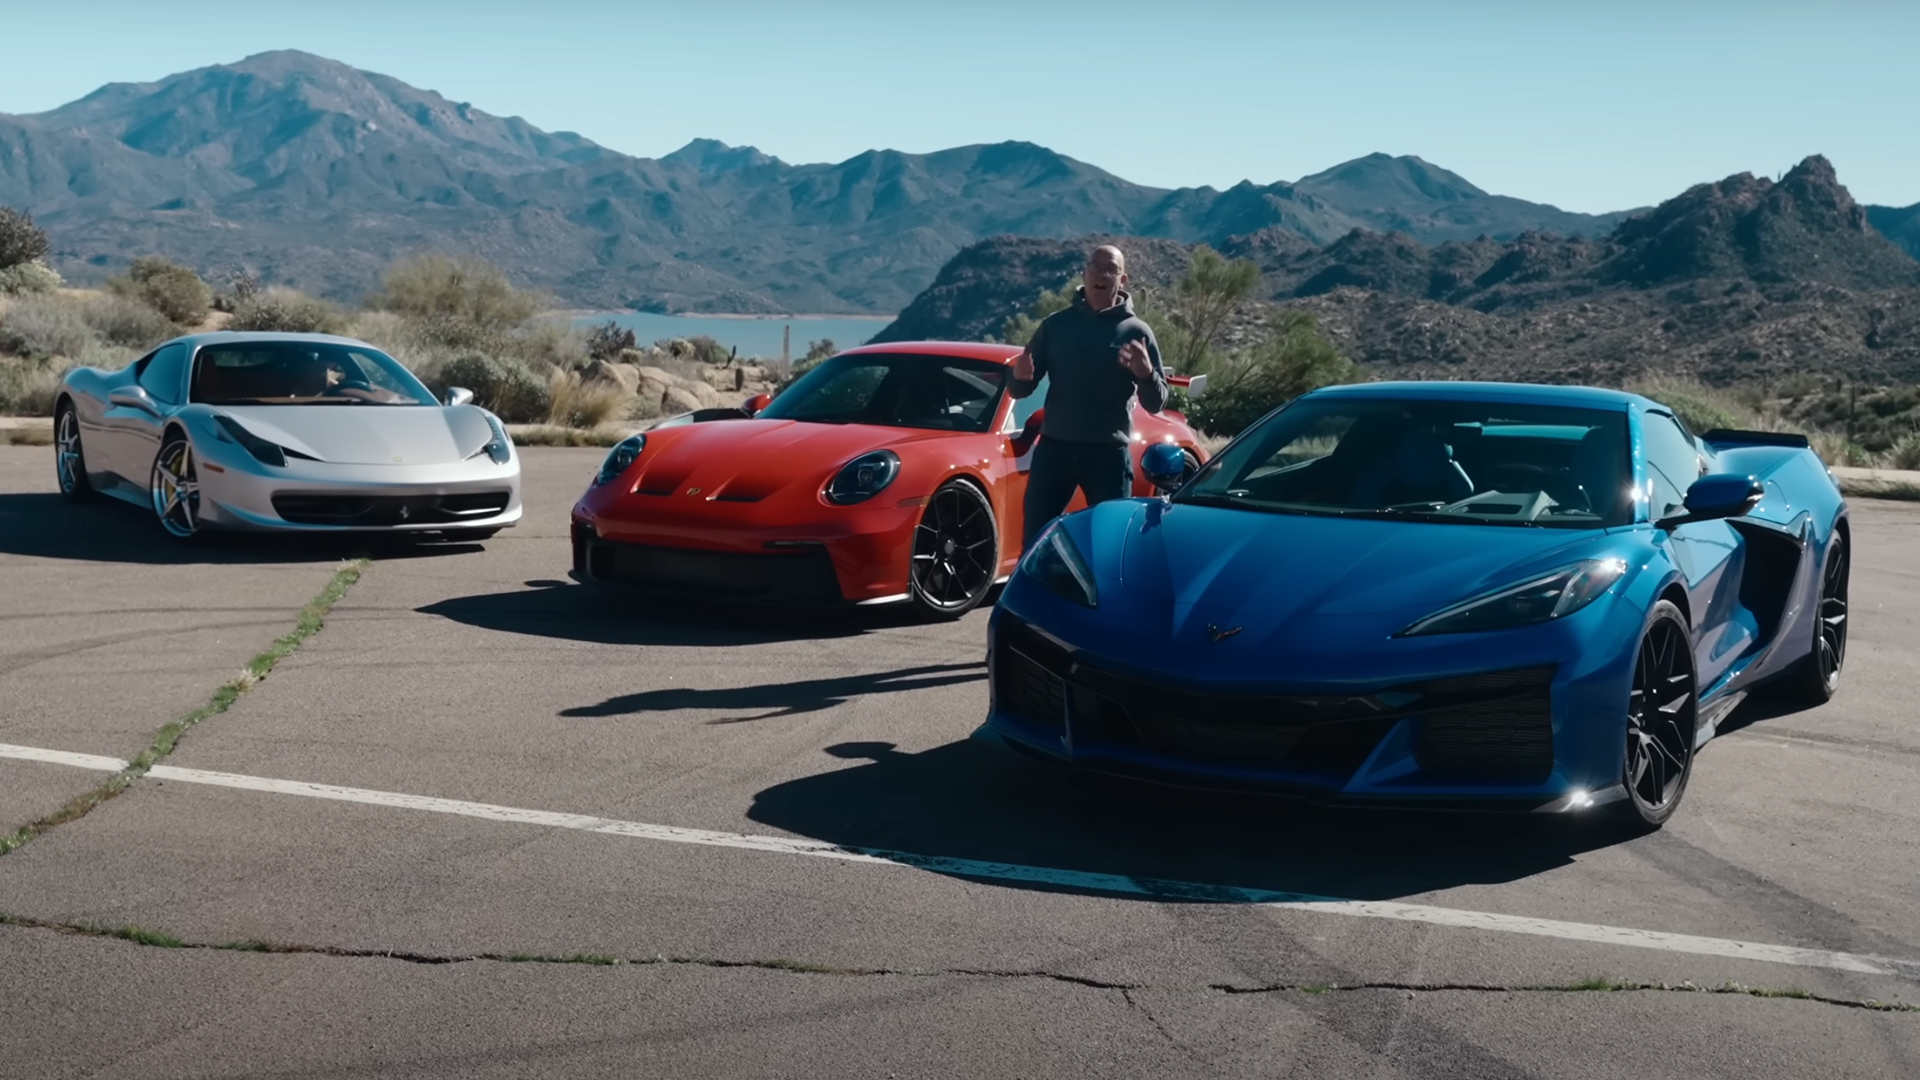 How Does The New Chevy Corvette Z06 Compare To The Ferrari 458 And Porsche 911 GT3? Auto Recent